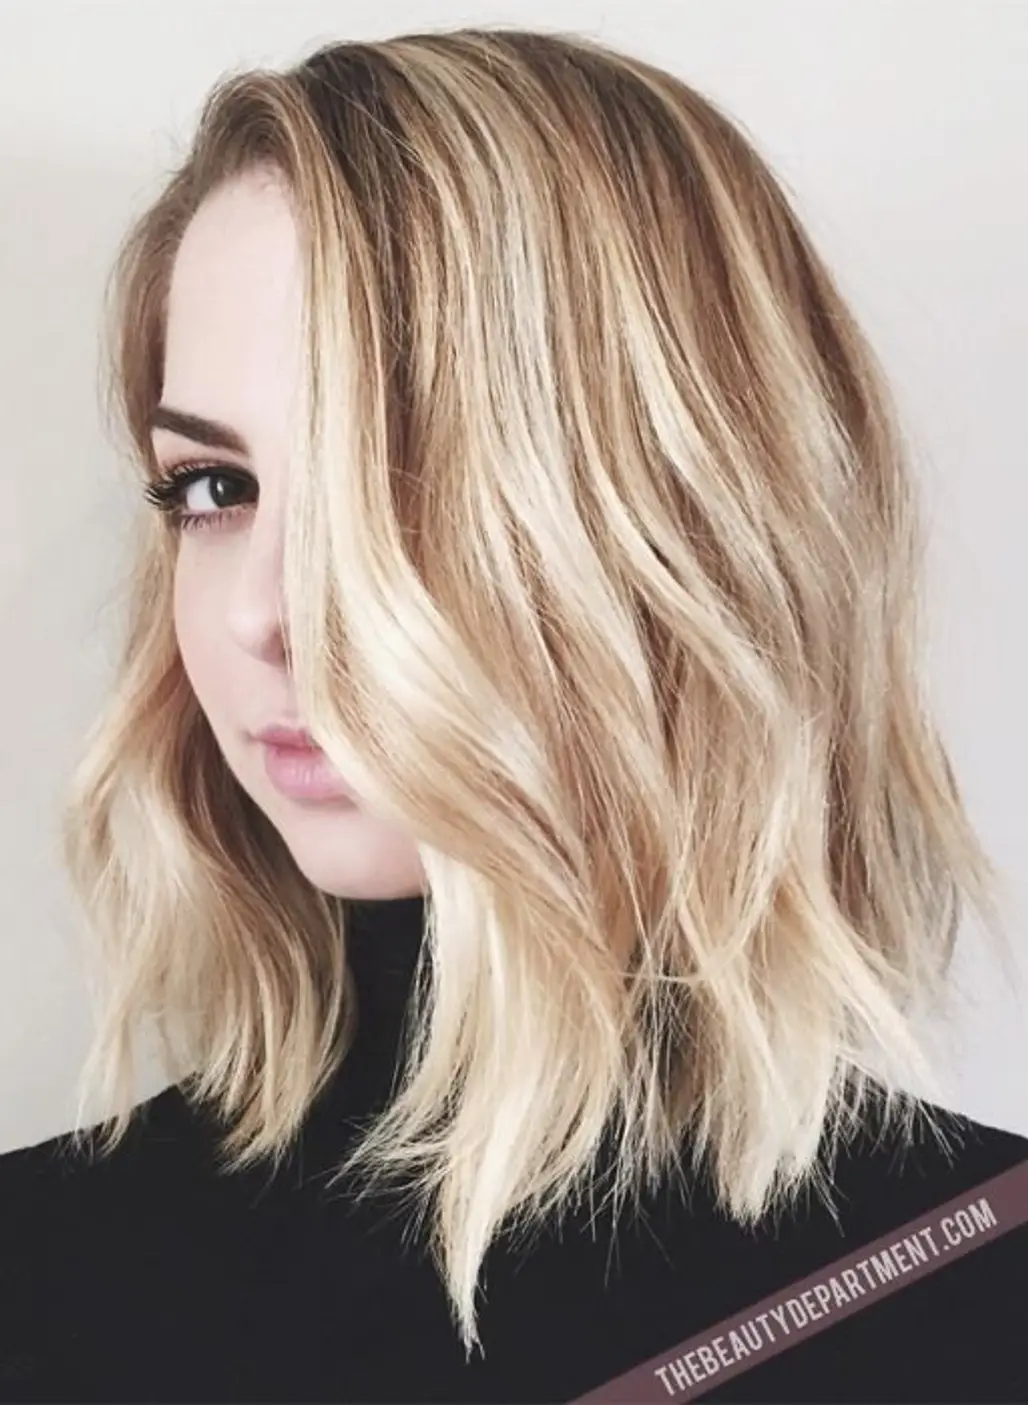 hair,human hair color,blond,face,hairstyle,